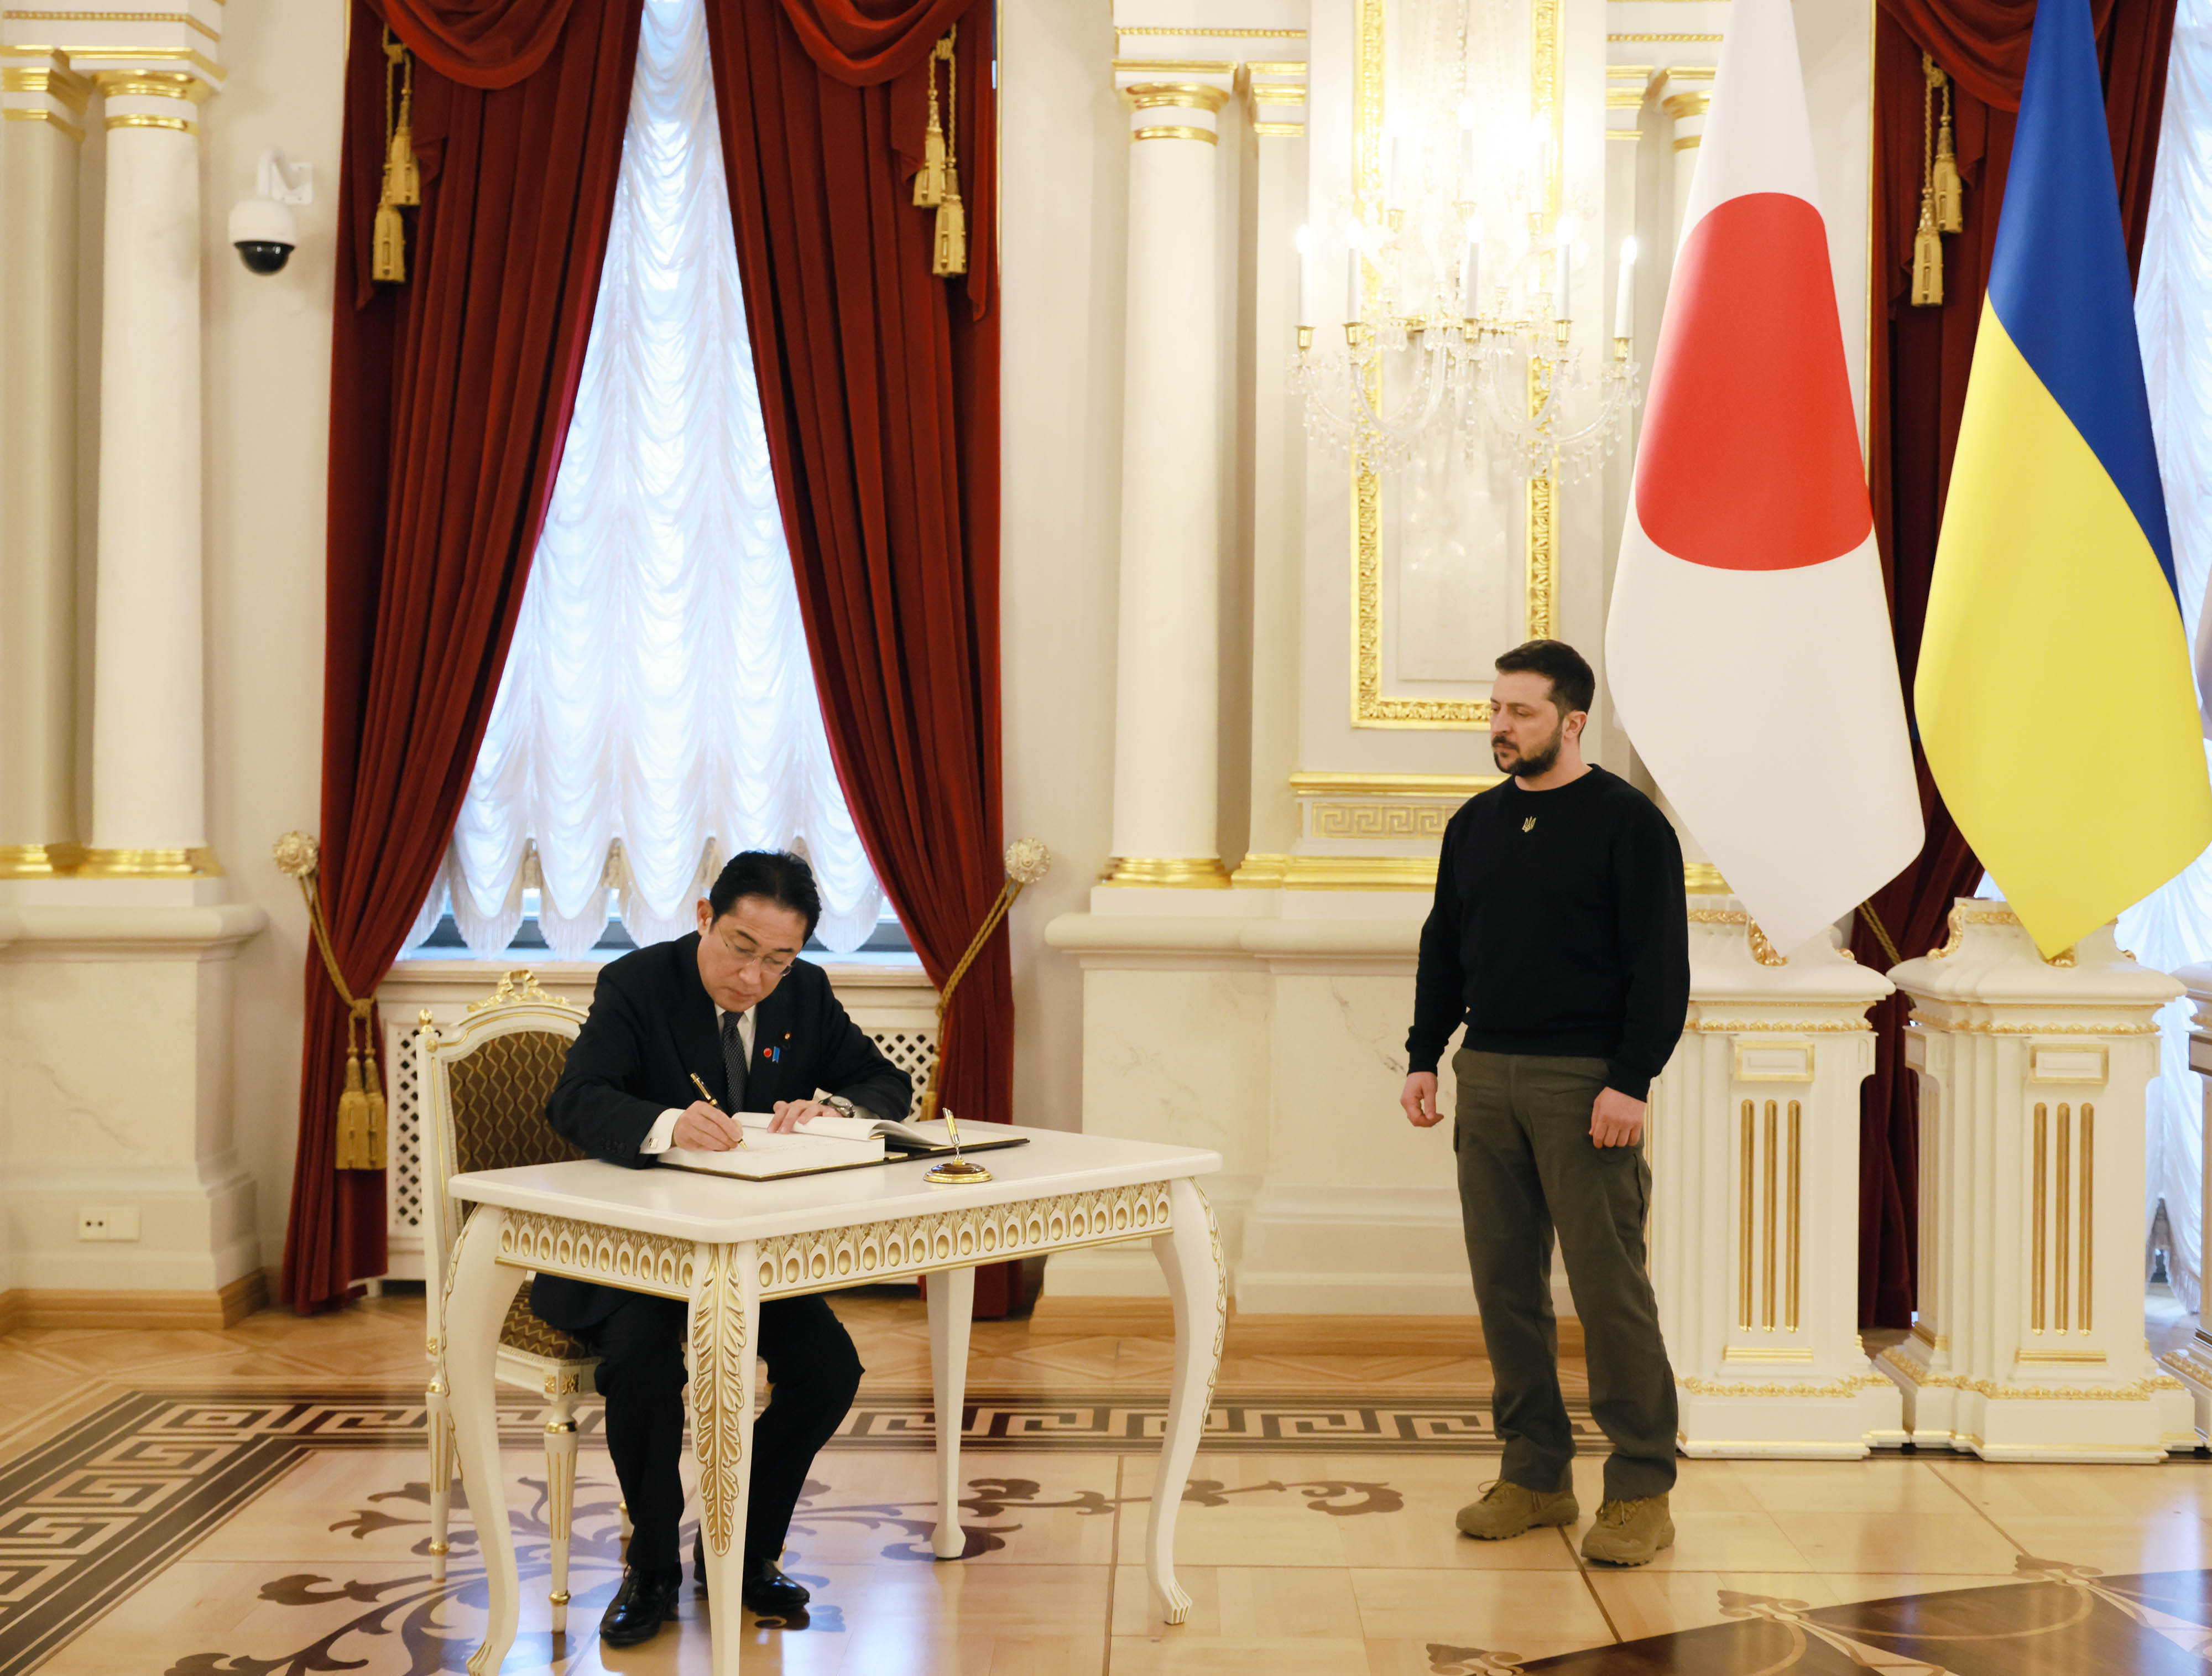 Prime Minister Kishida signing a guest book